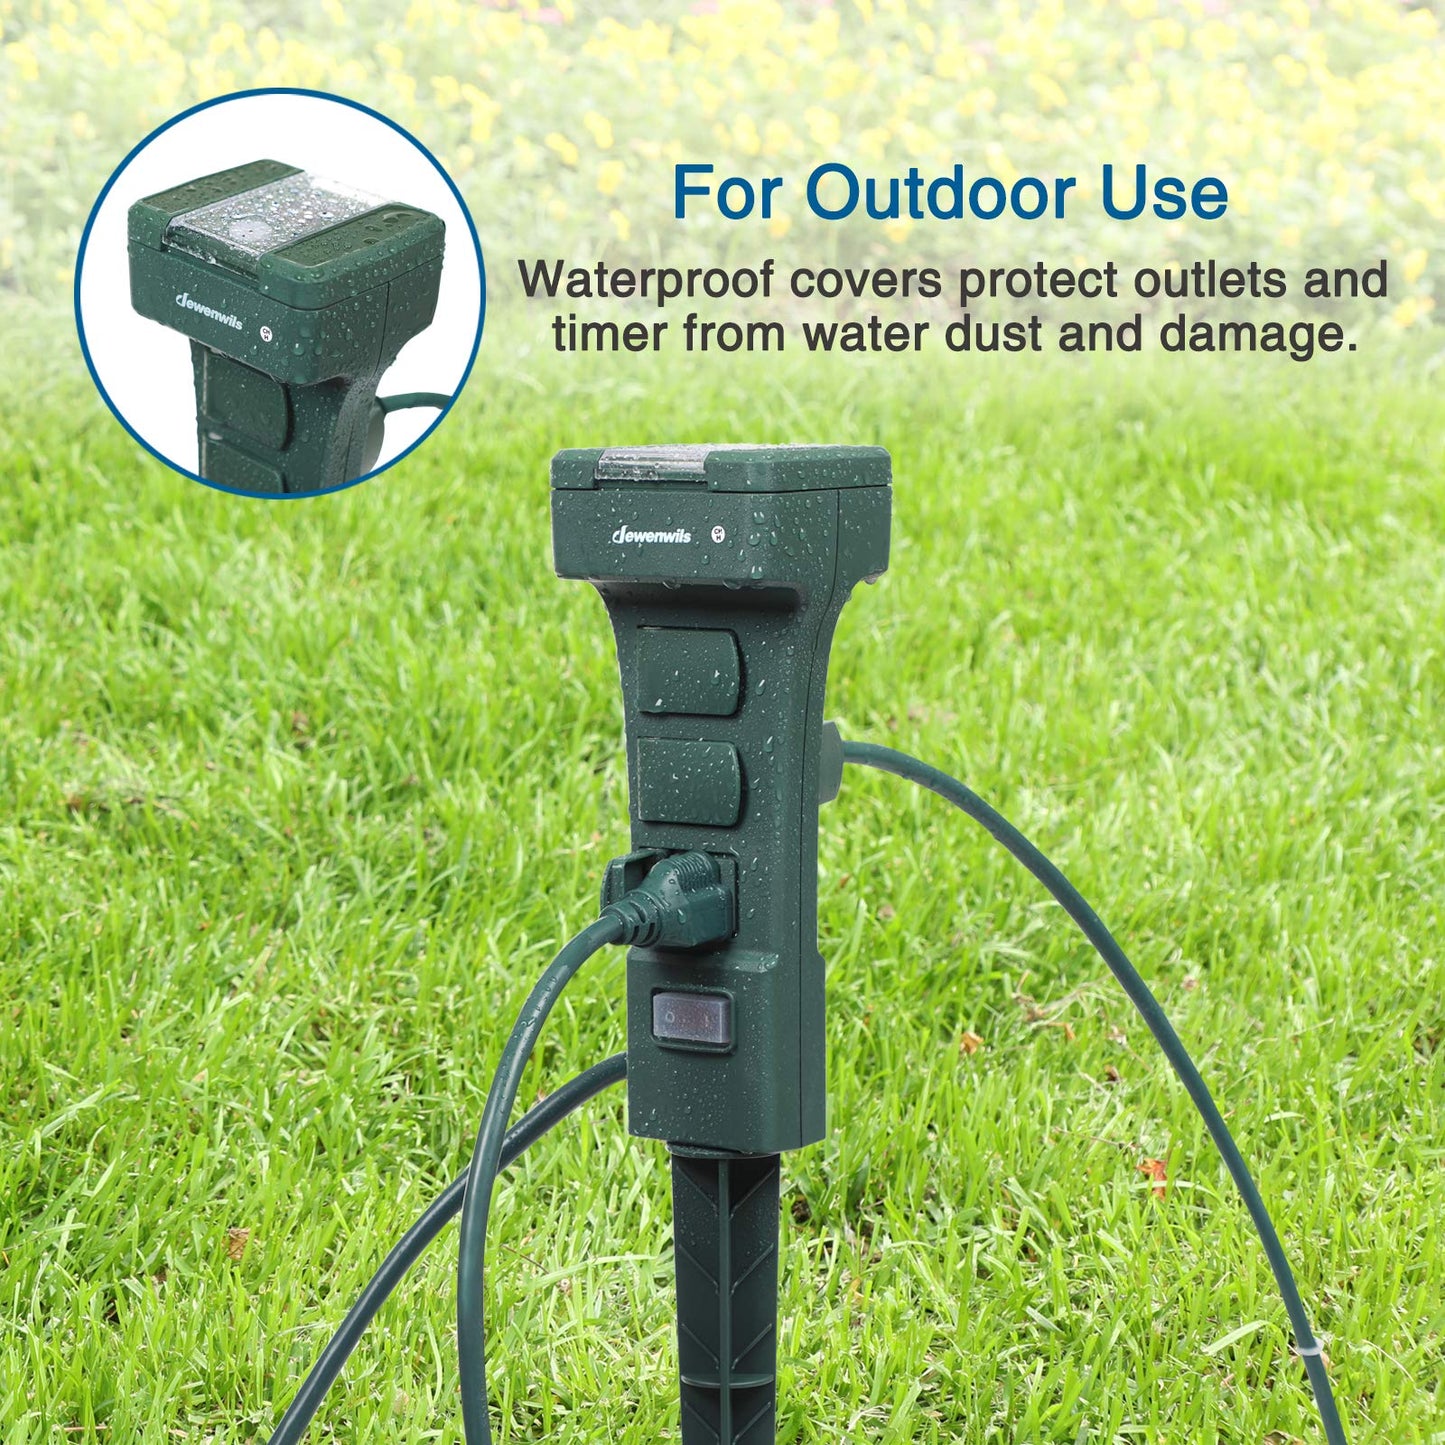 Outdoor Power Stake Timer Waterproof, 100FT Remote Control Outlet Timer, 6 Grounded Outlets 6FT Cord, Photocell Dusk to Dawn, for Christmas, UL Listed